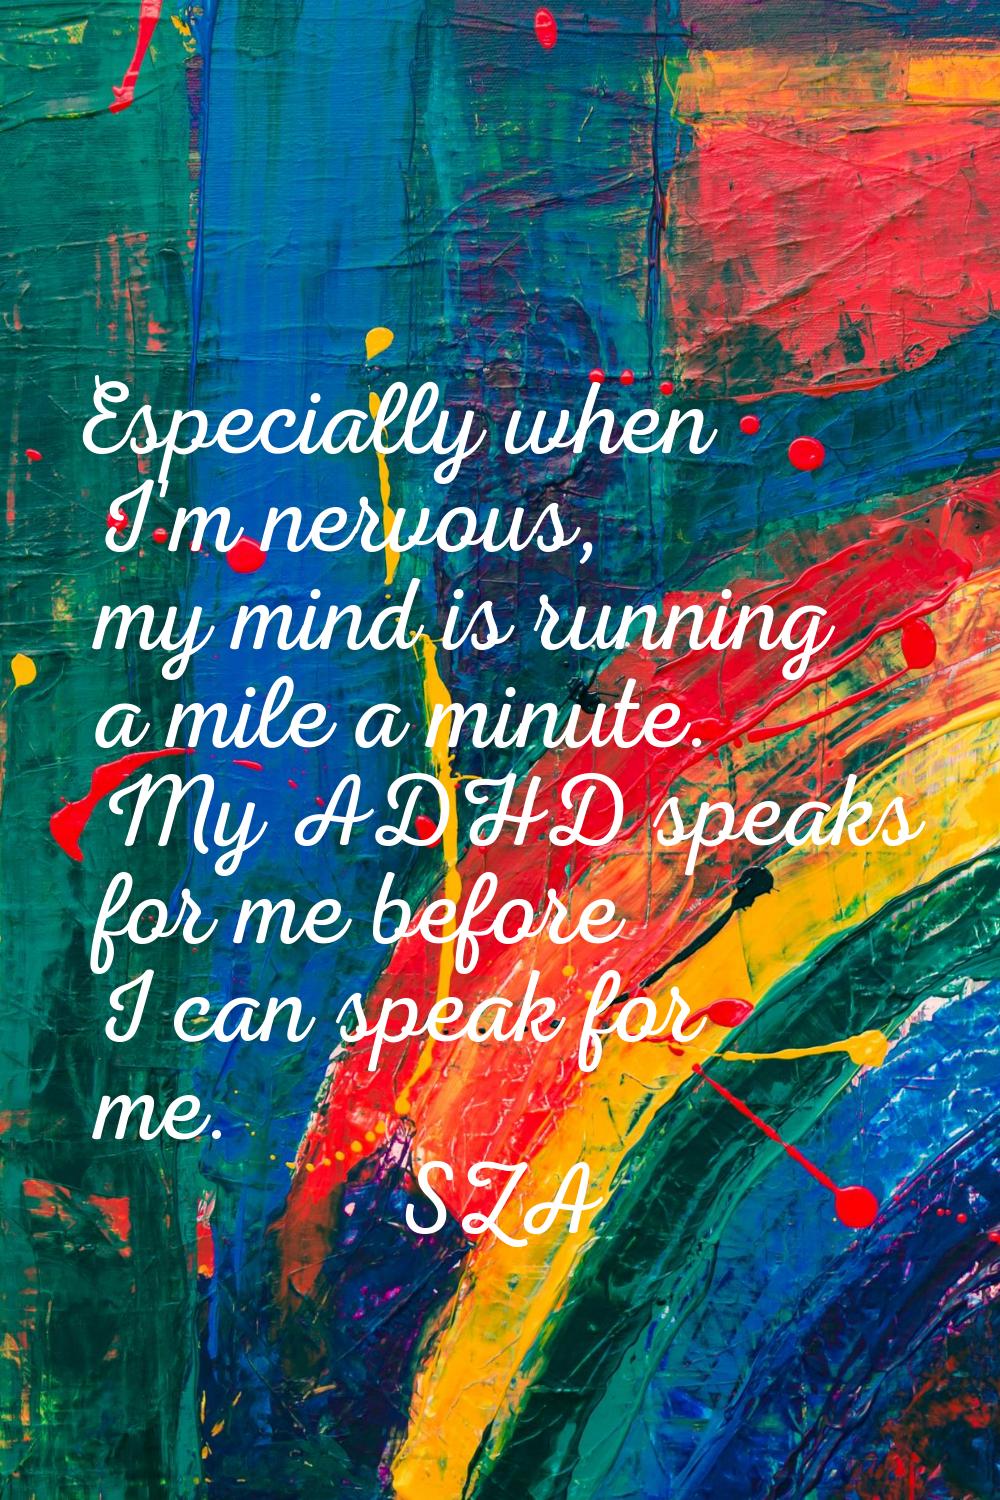 Especially when I'm nervous, my mind is running a mile a minute. My ADHD speaks for me before I can